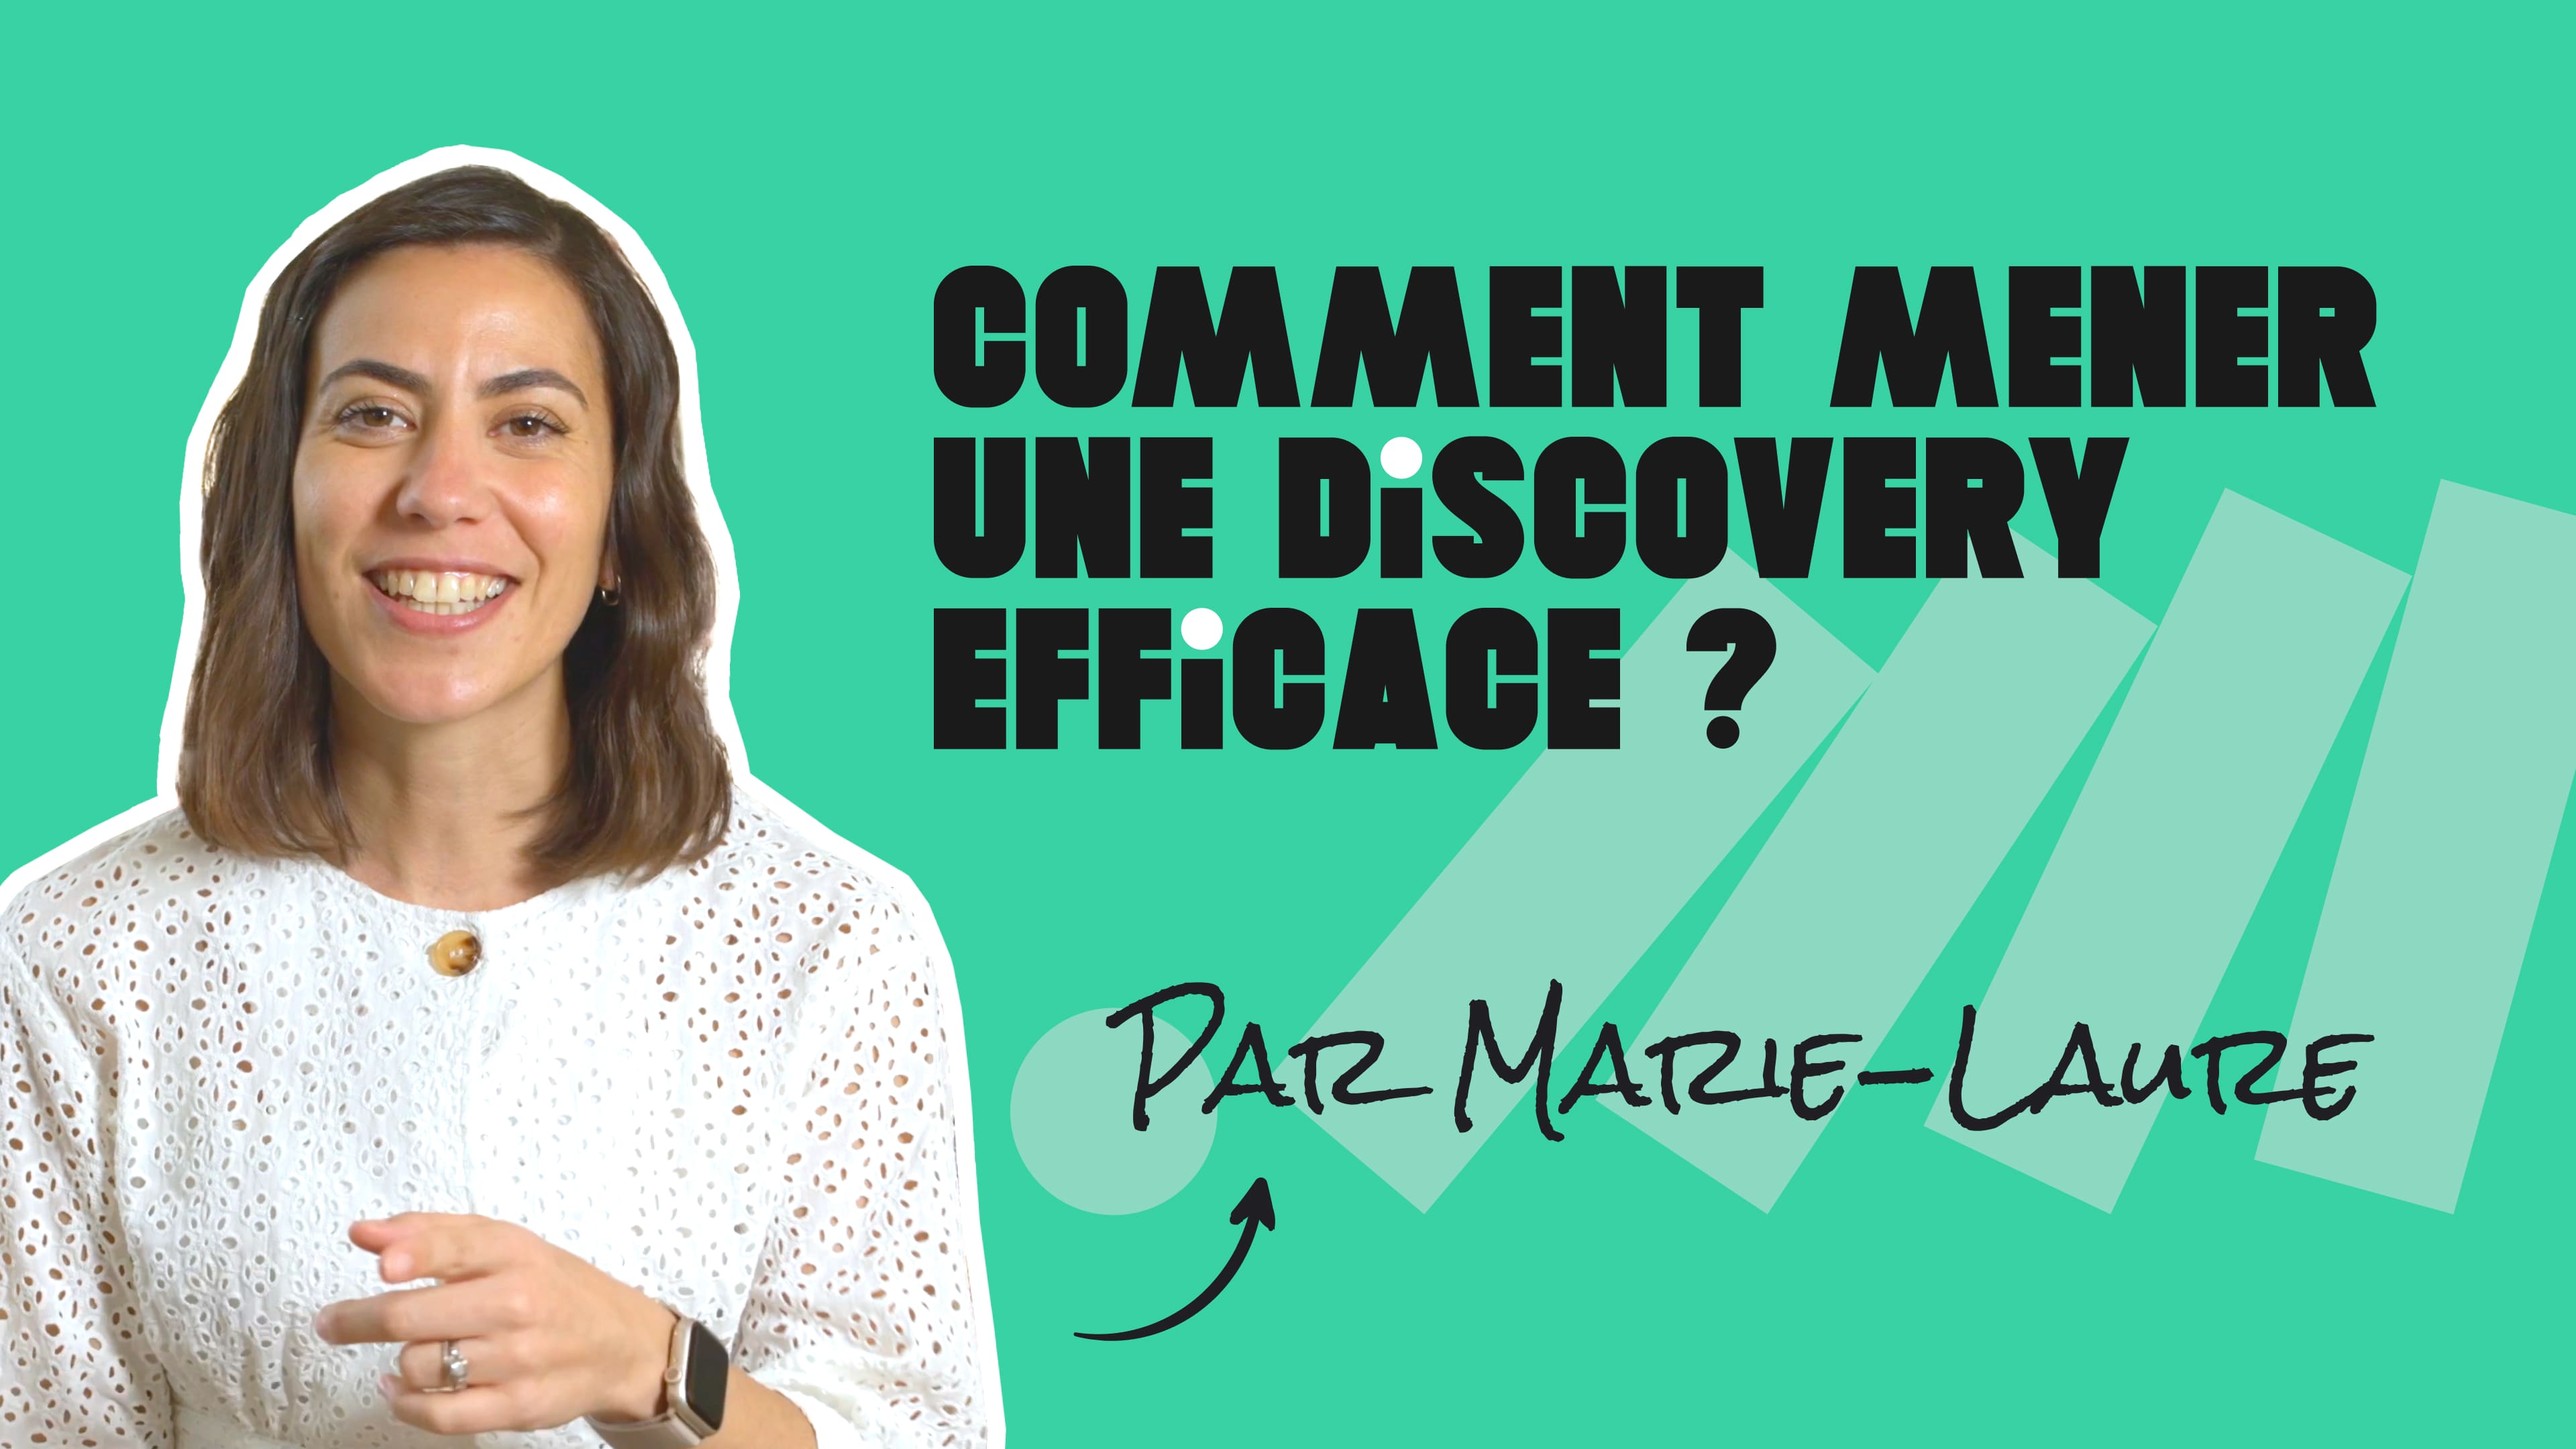 Comment mener une discovery efficace ?